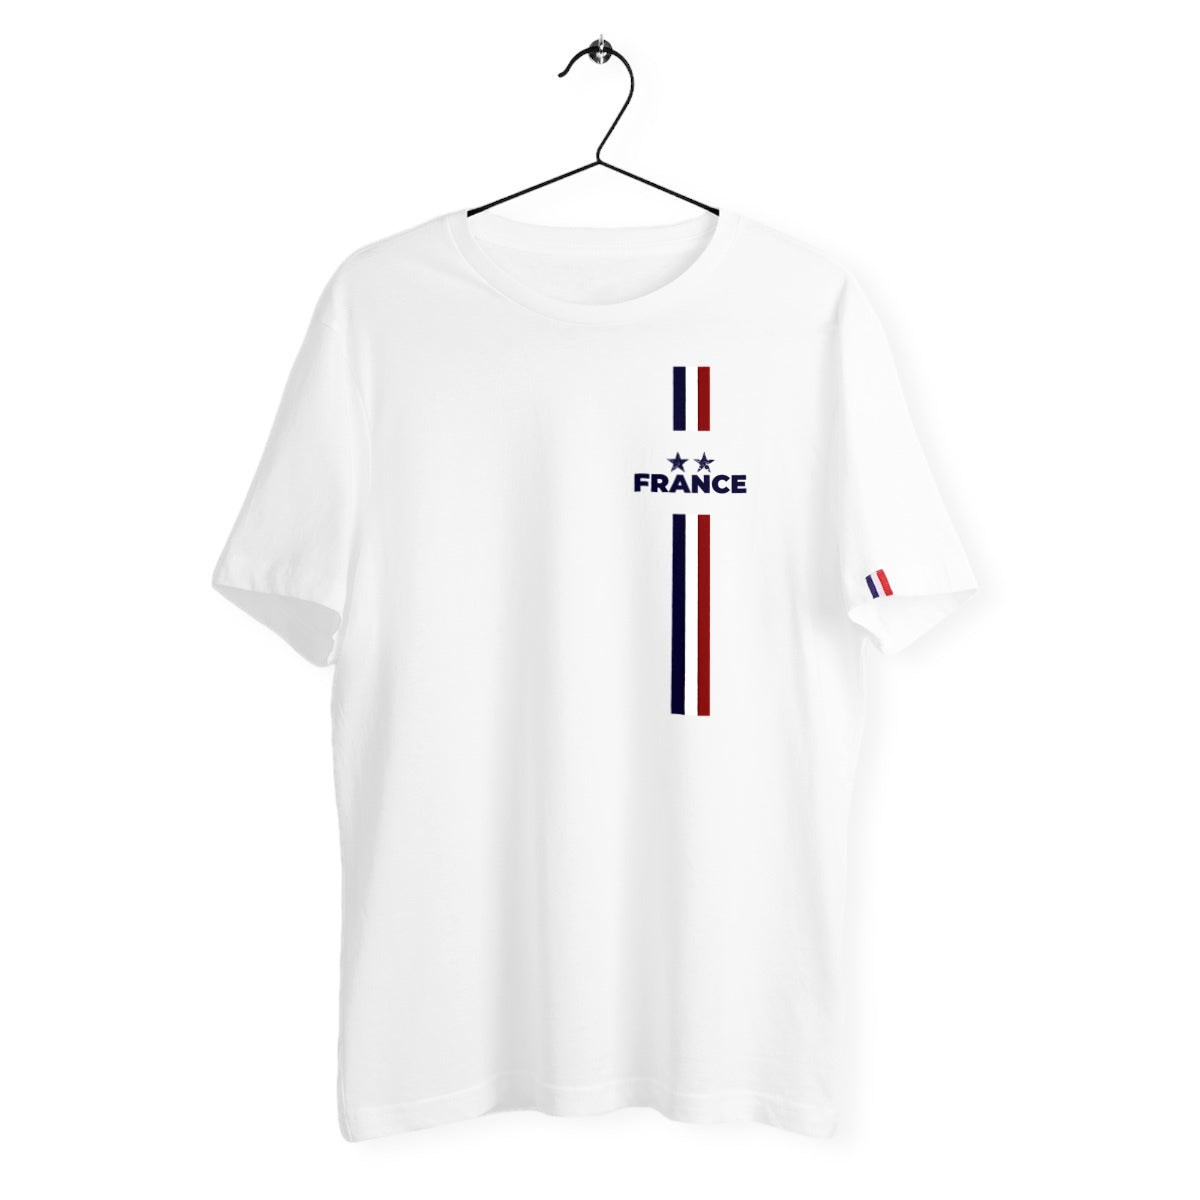 T-Shirt Made in France Homme Bio - France 2 Etoiles, t-shirt made in France homme France deux étoiles en coton bio, t-shirt foot France 2 étoiles, t-shirt fabriqué en France de foot, t-shirt deux étoiles équipe de France de football, t-shirt équipe de France de football, t-shirt homme made in France de foot, t-shirt Coupe du Monde de foot, t-shirt UEFA Euro 2020, t-shirt champions League, t-shirt fan de foot, t-shirt foot T-French, t-shirt made in France blanc